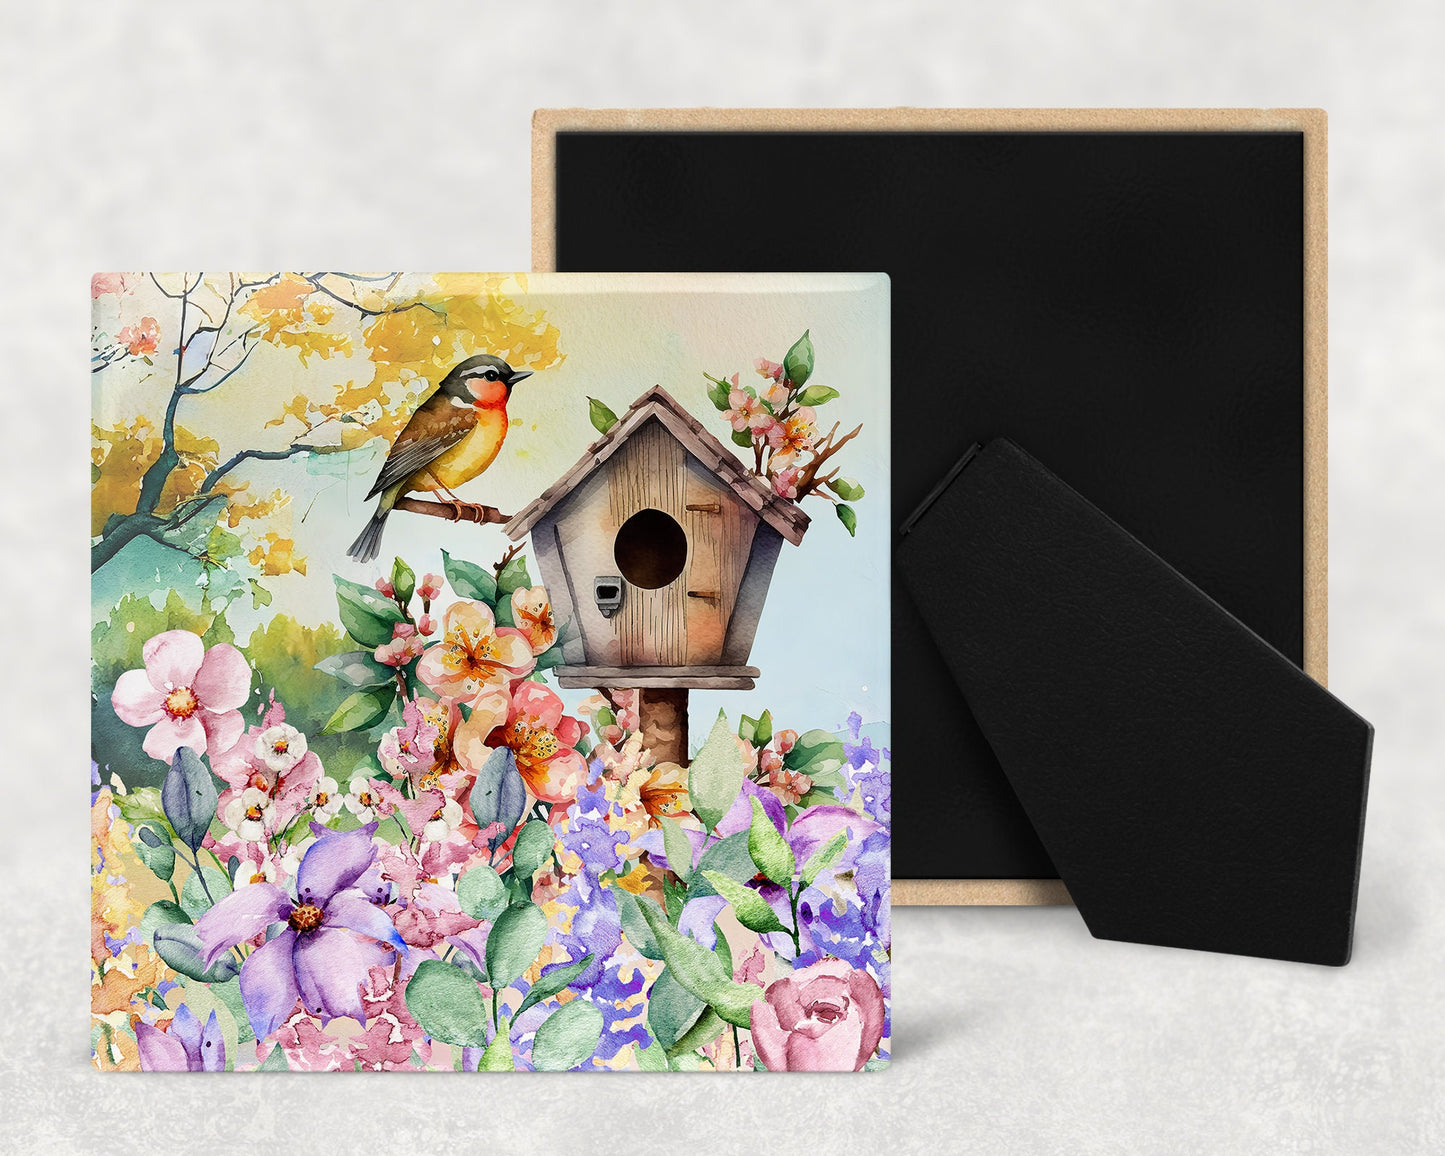 Watercolor Robin Birdhouse Art Decorative Ceramic Tile with Optional Easel Back - Available in 3 Sizes